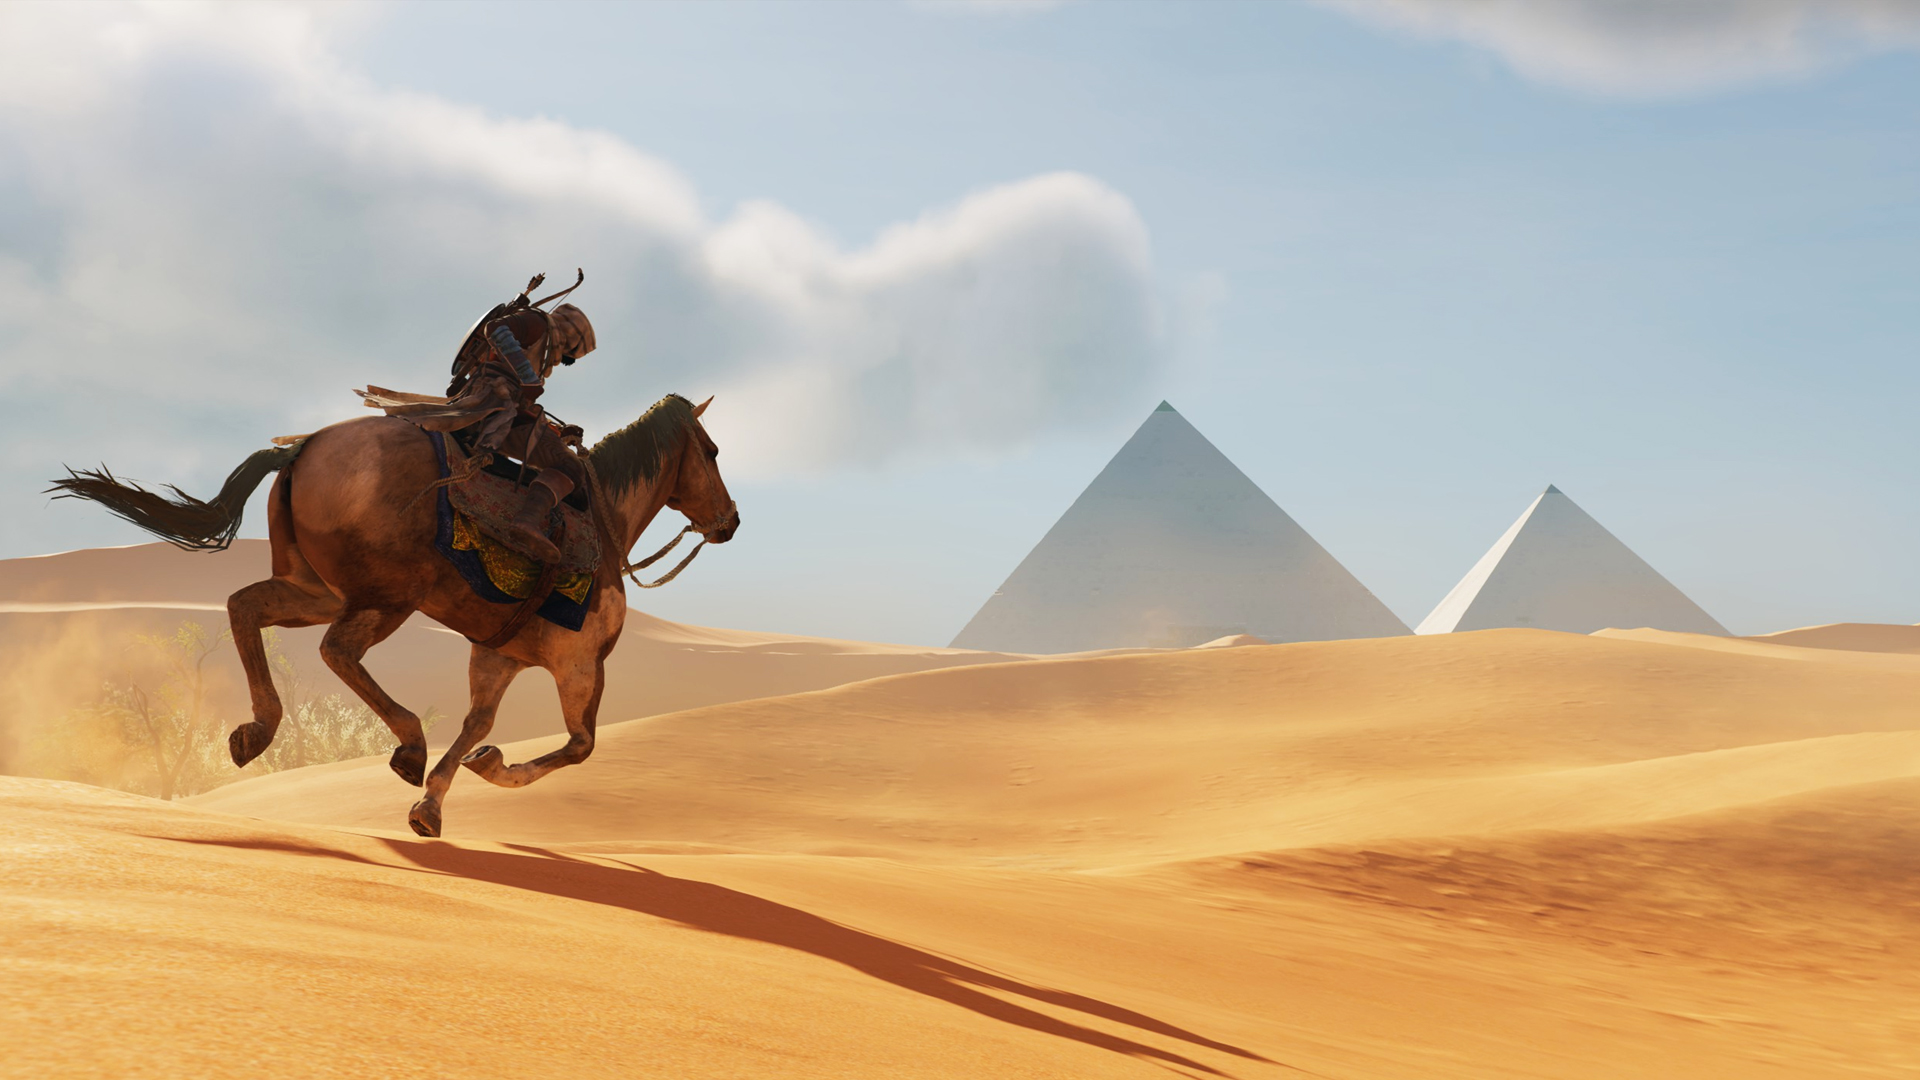 Which Assassin's Creed game has the best setting?